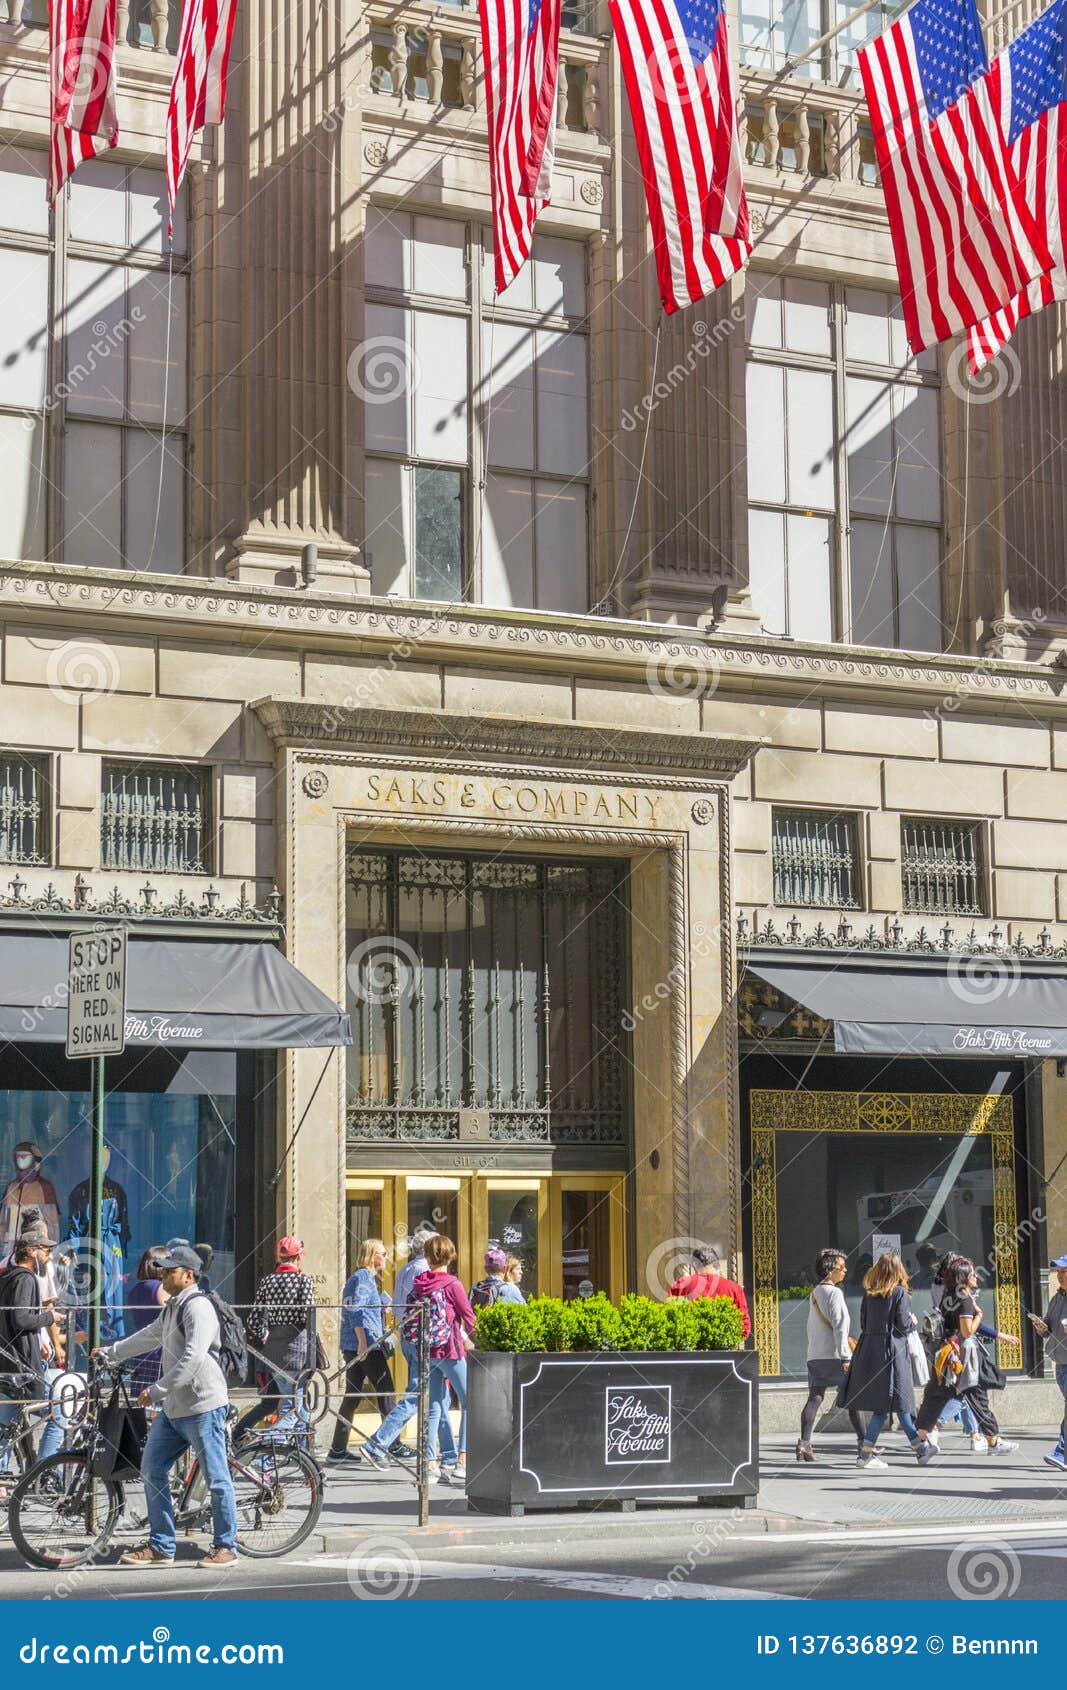 Many Flags on the Facade of the Saks Fifth Avenue Department Store in ...